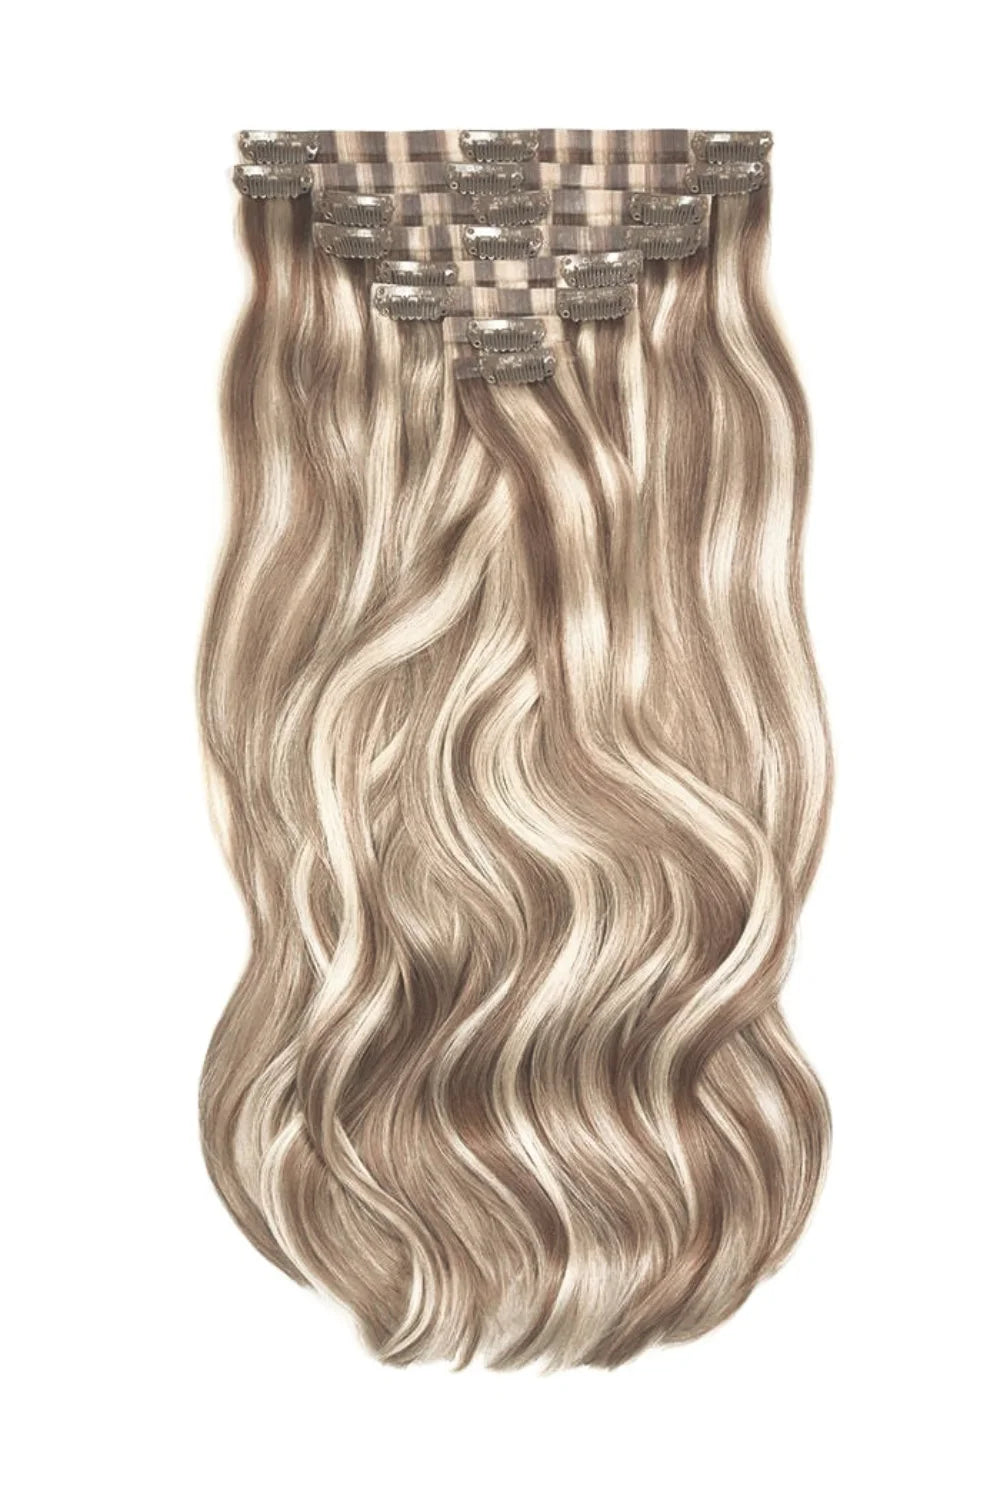 #8/60 remy royale seamless hair extension